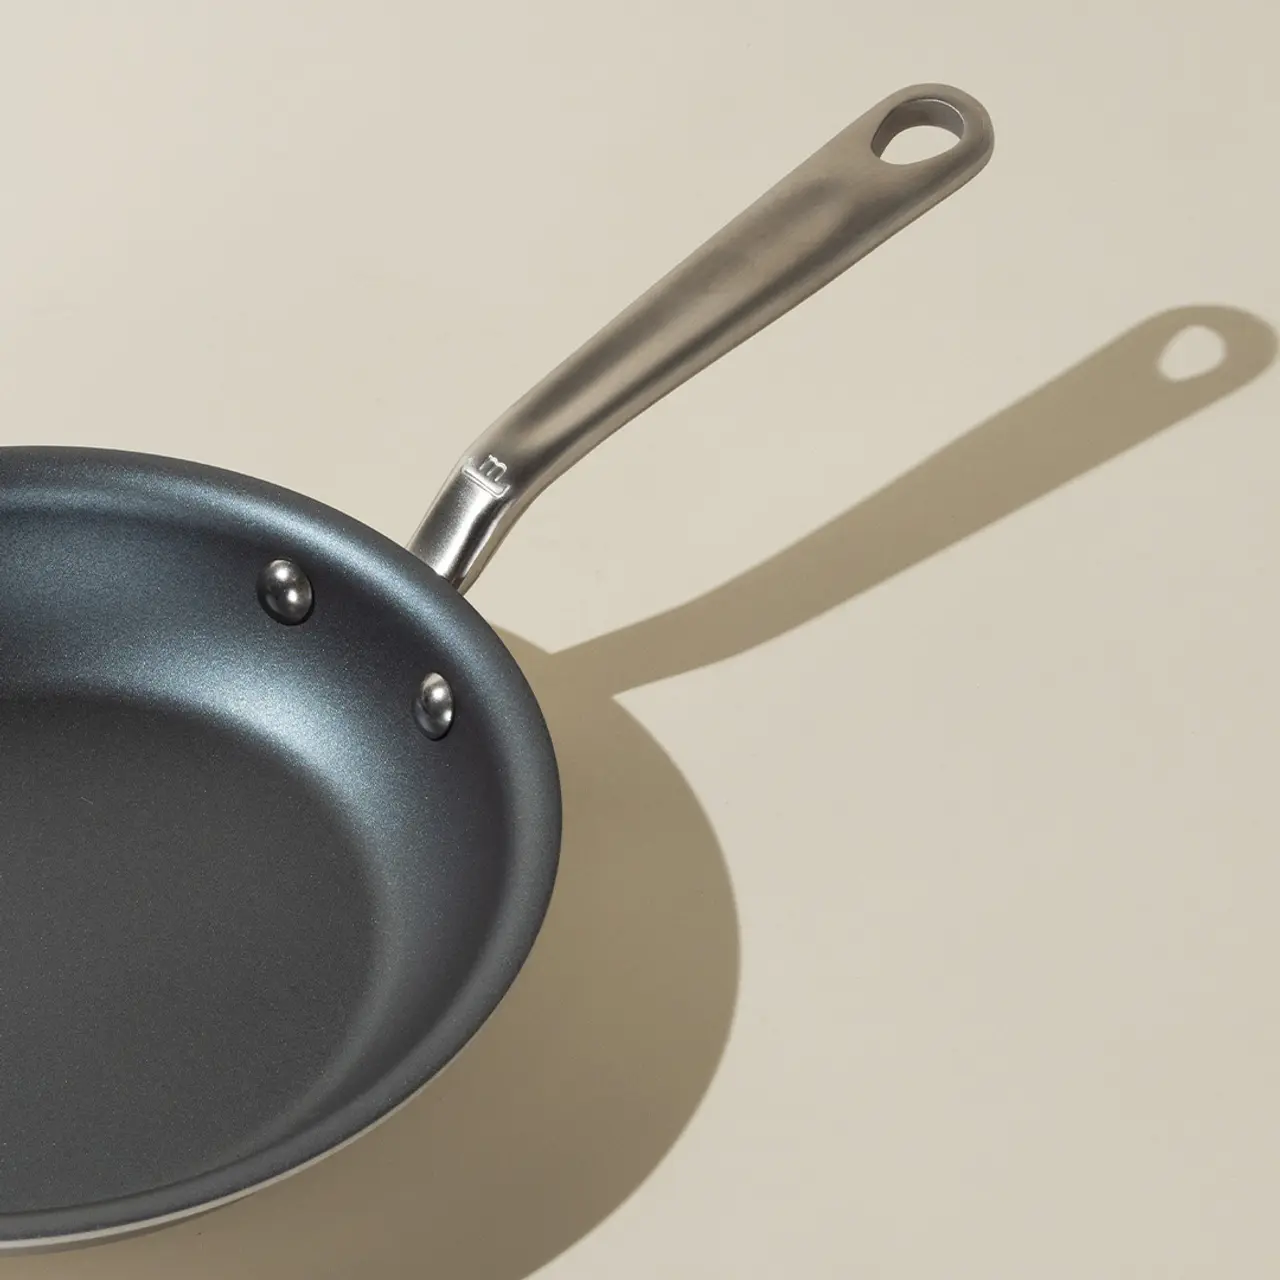 A frying pan casts a shadow on a light surface, illustrating its form and handle.